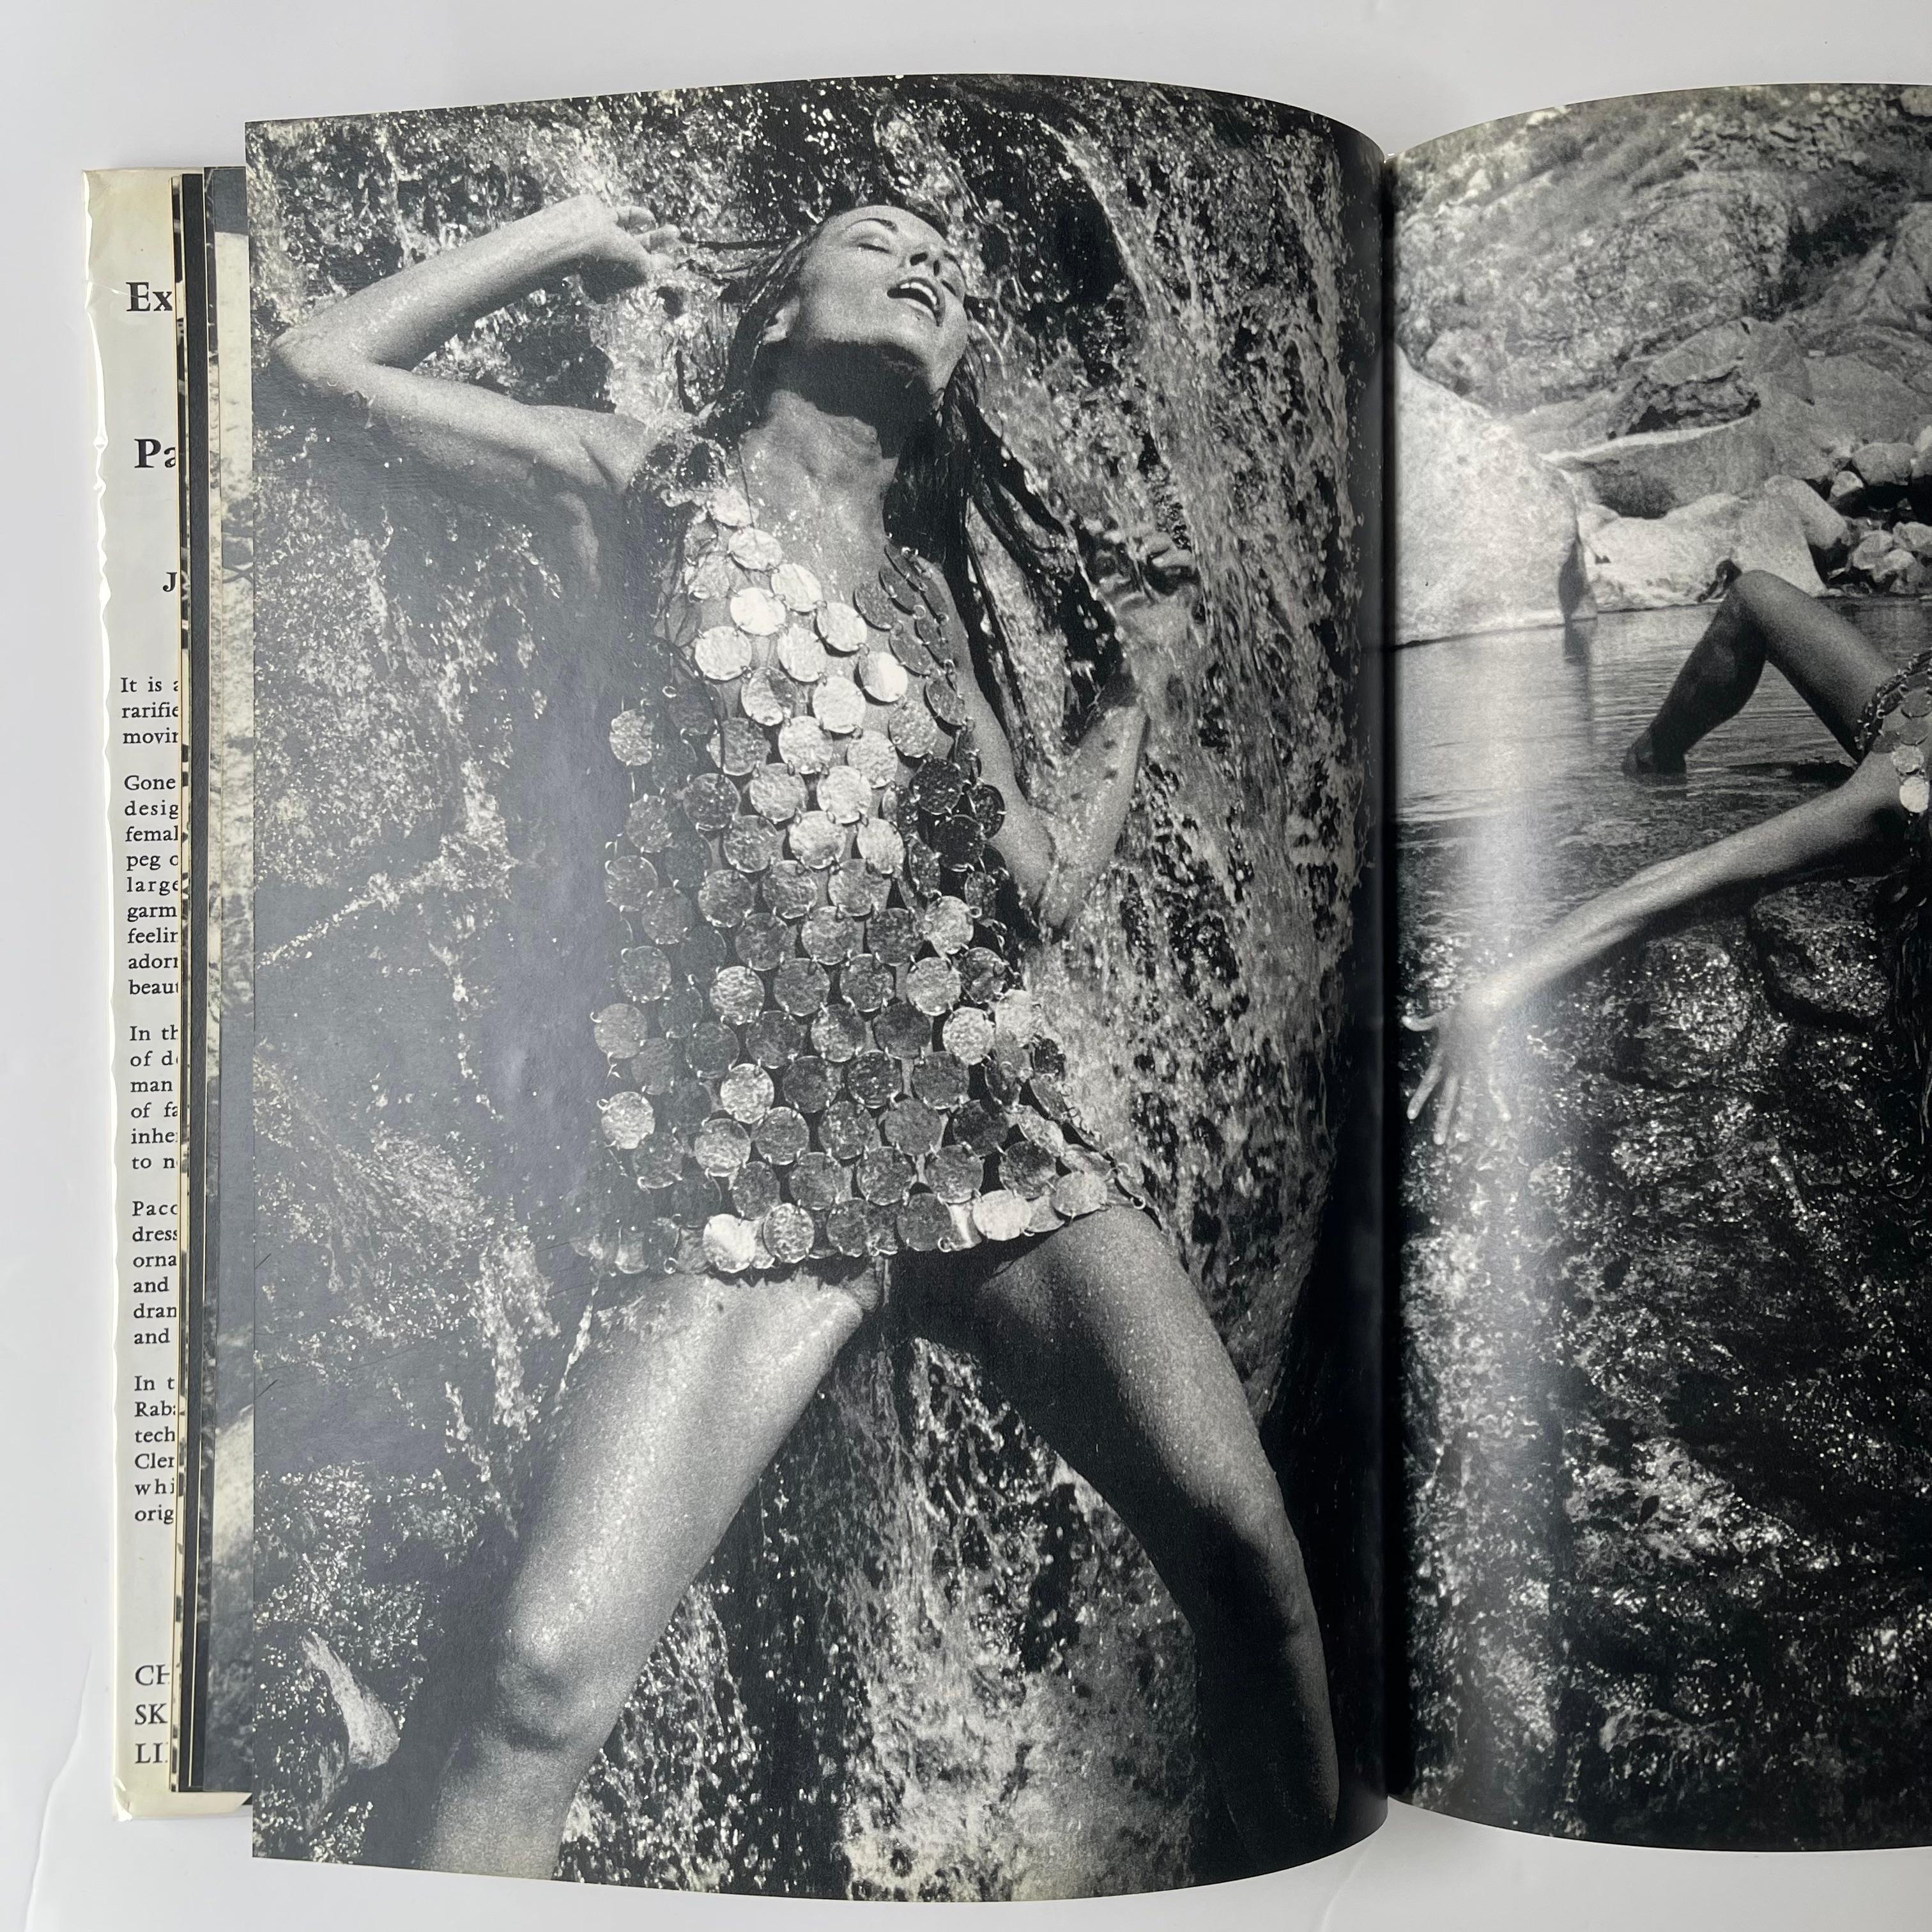 Paper Canned Candies, The Exotic Women and Clothes of Paco Rabanne by Jean Clemmer 